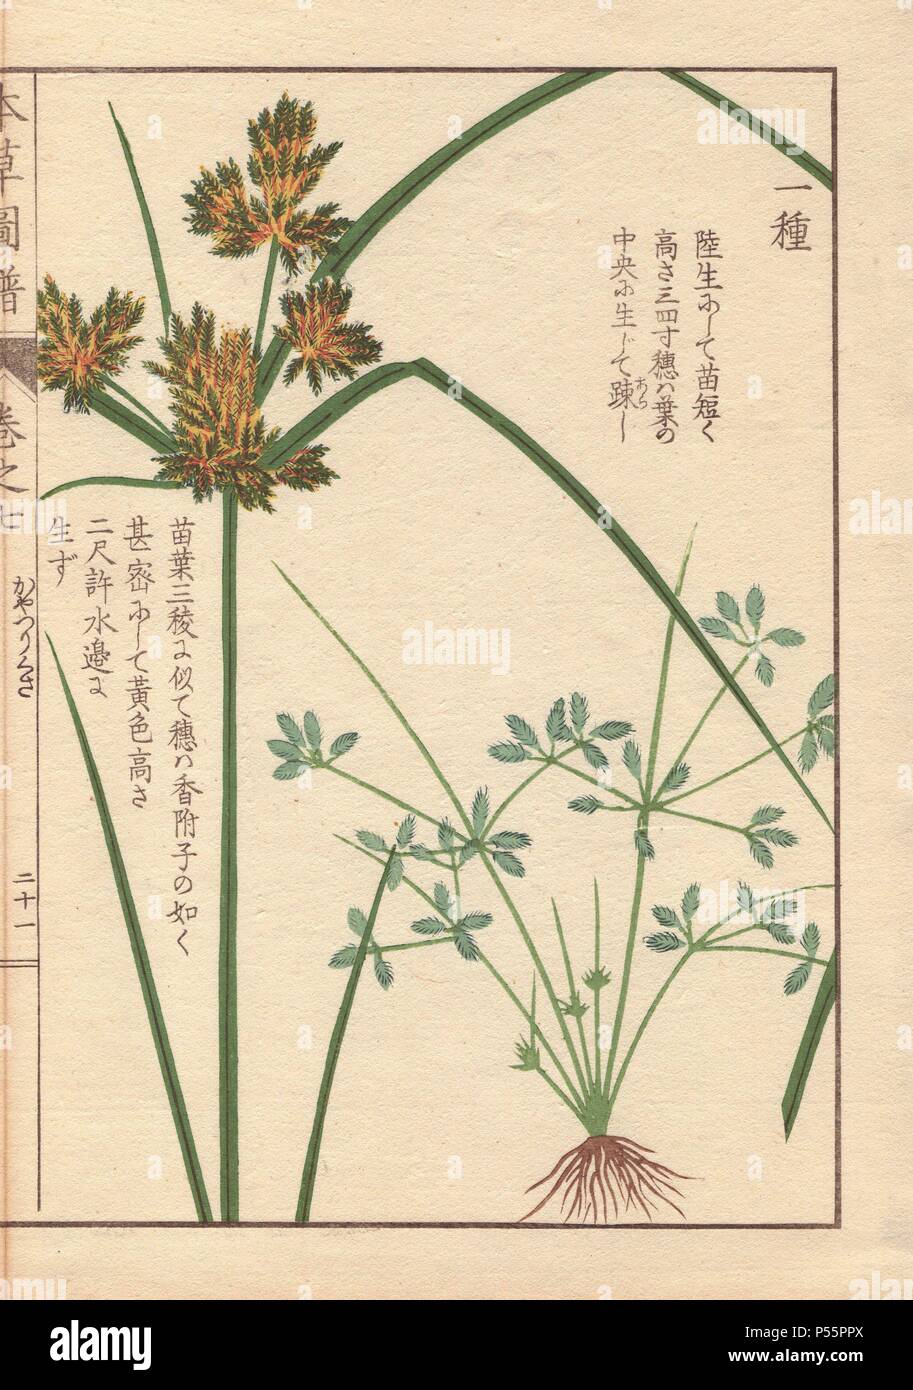 Roots, reeds and flowers of poorland flatsedge, Cyperus compressus L. . Colour-printed woodblock engraving by Kan'en Iwasaki from 'Honzo Zufu,' an Illustrated Guide to Medicinal Plants, 1884. Iwasaki (1786-1842) was a Japanese botanist, entomologist and zoologist. He was one of the first Japanese botanists to incorporate western knowledge into his studies. Stock Photo